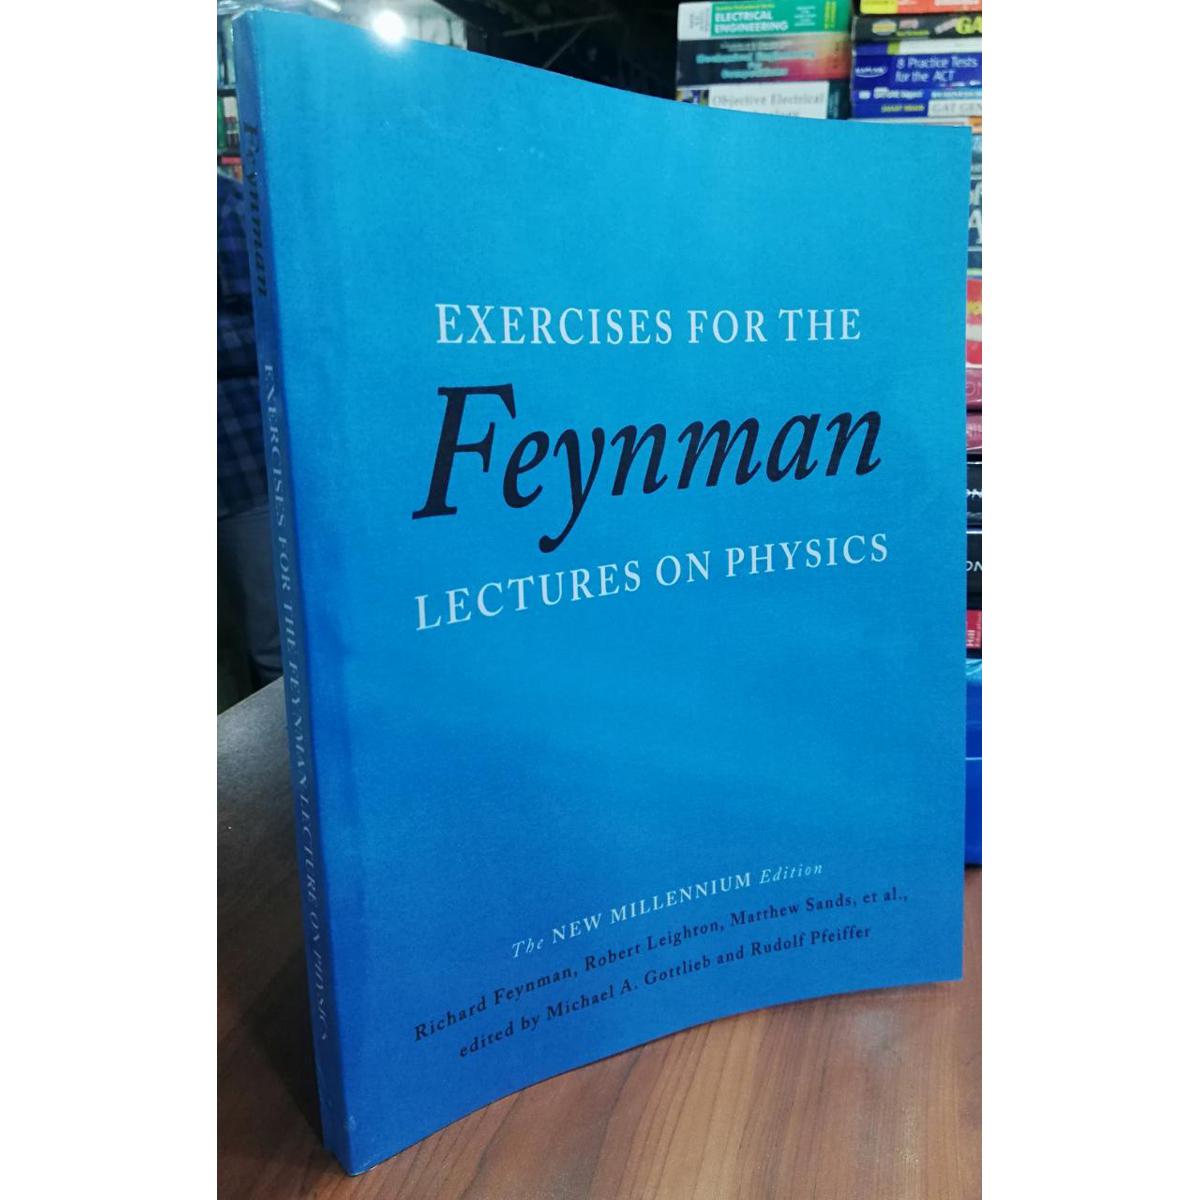 Exercises for the Feynman Lectures on Physics by Richard P. Feynman